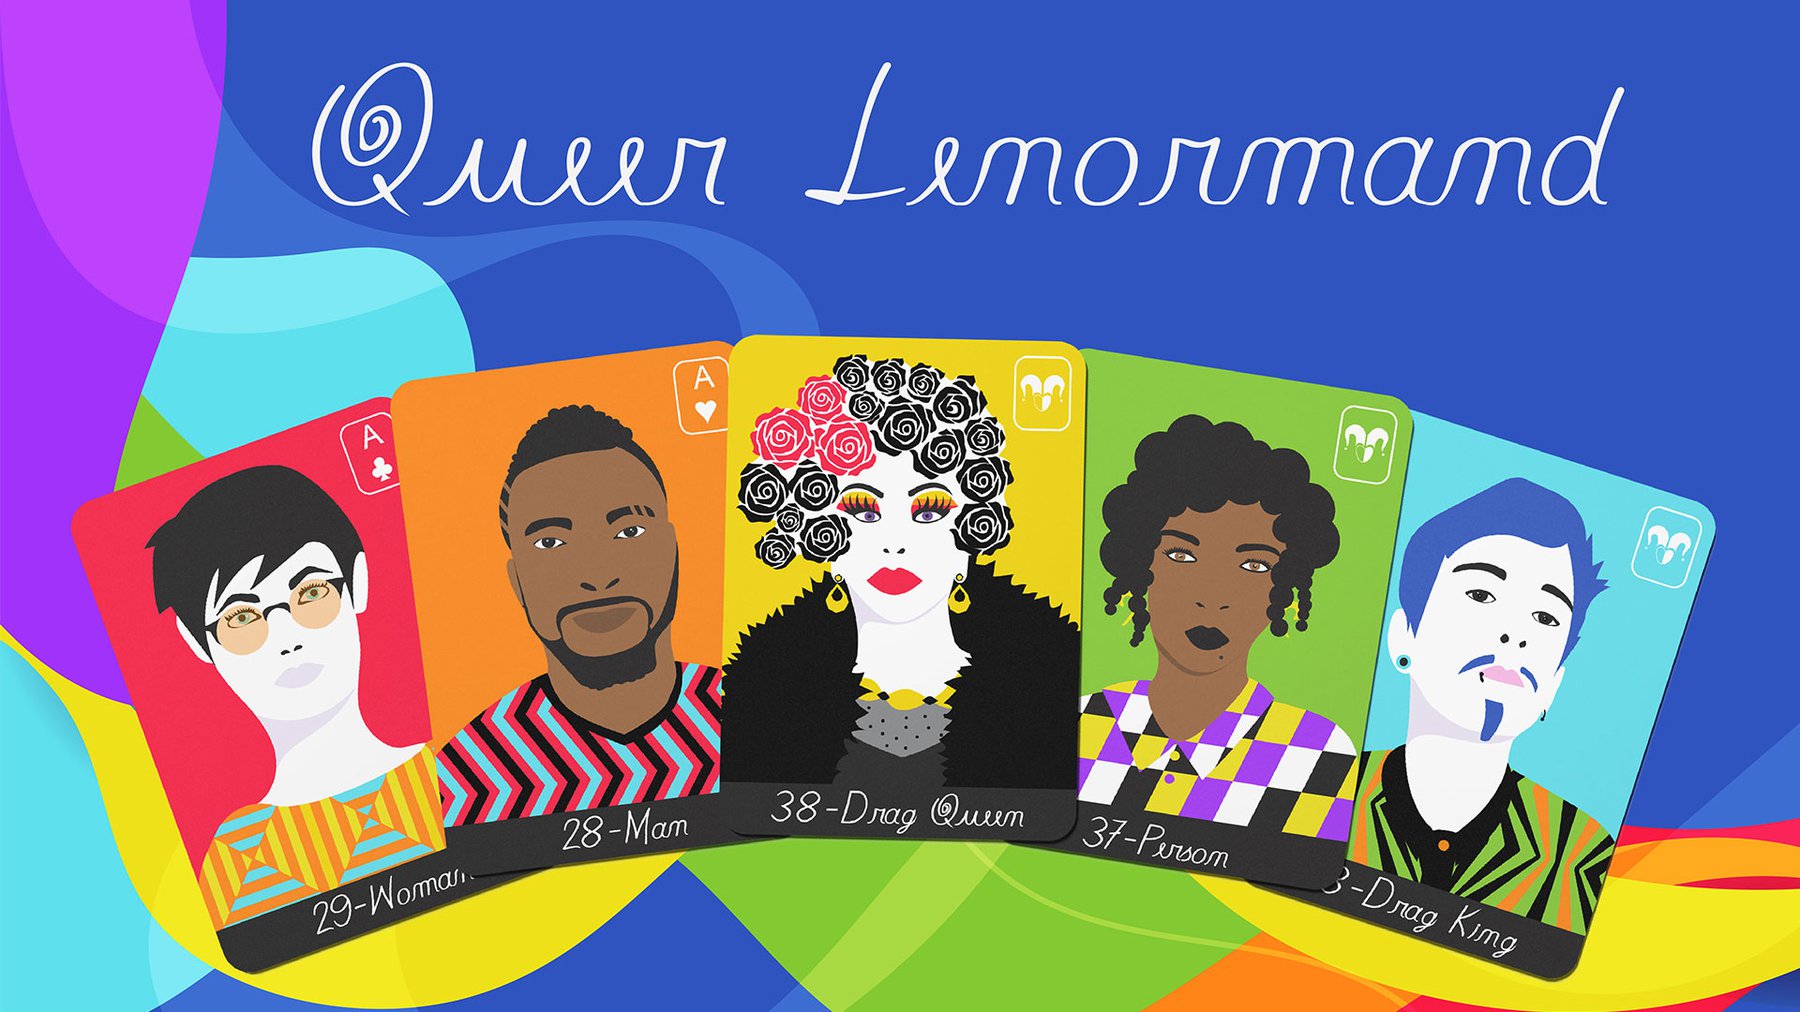 1. Queer Lenormand